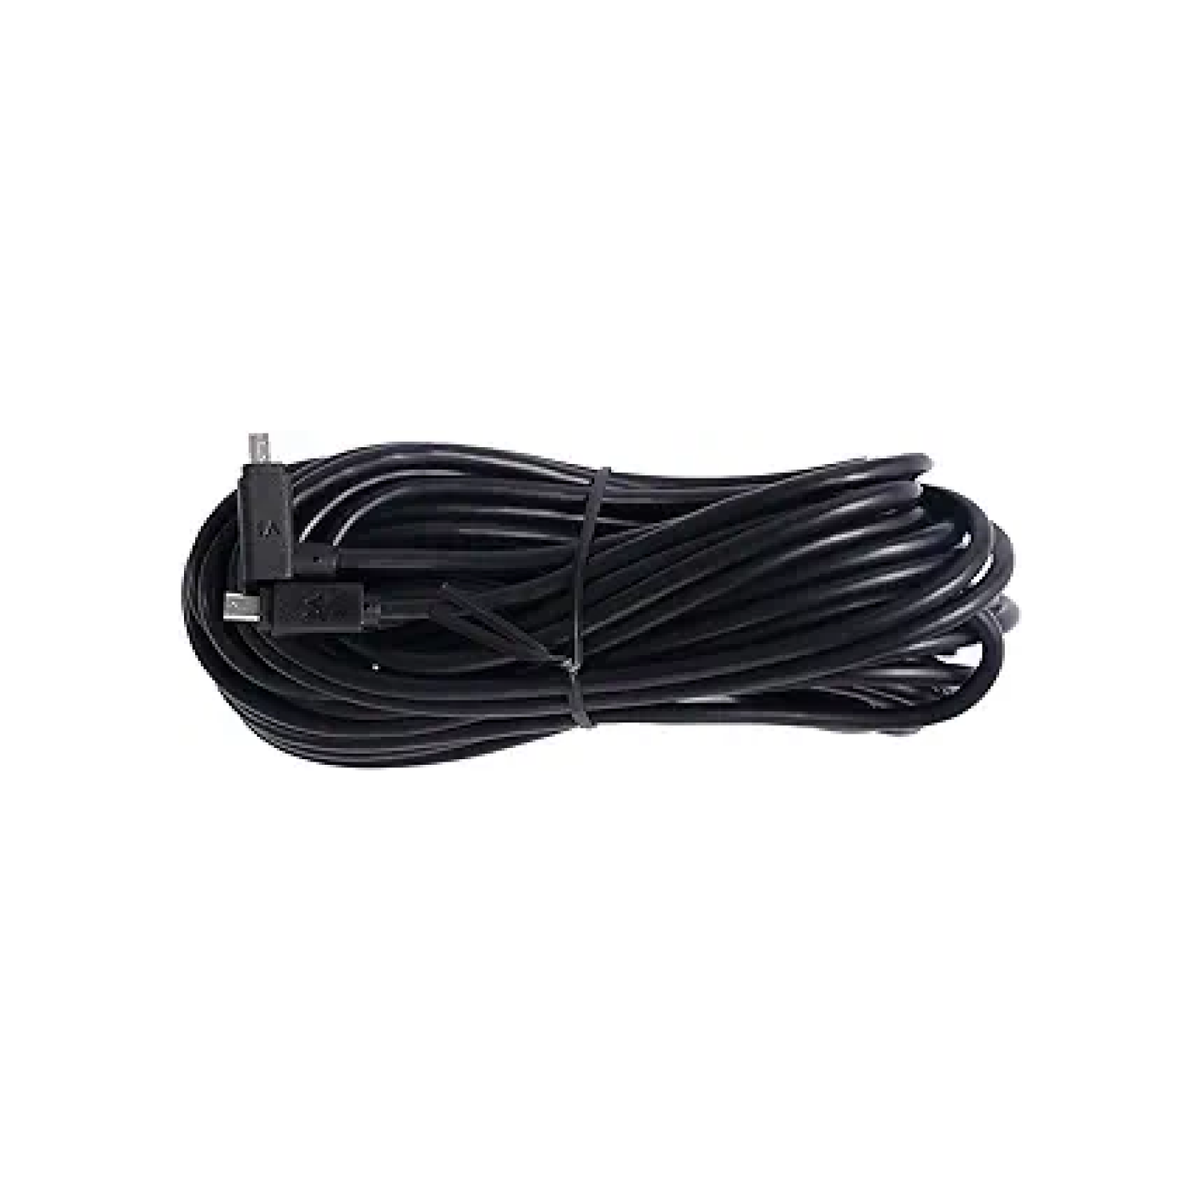 Miofive 10M Rear Cable for Dash Cam Dual, View Backup Camera Reverse Car Recorder Cable Extension Cord (8-pin 32.81ft)